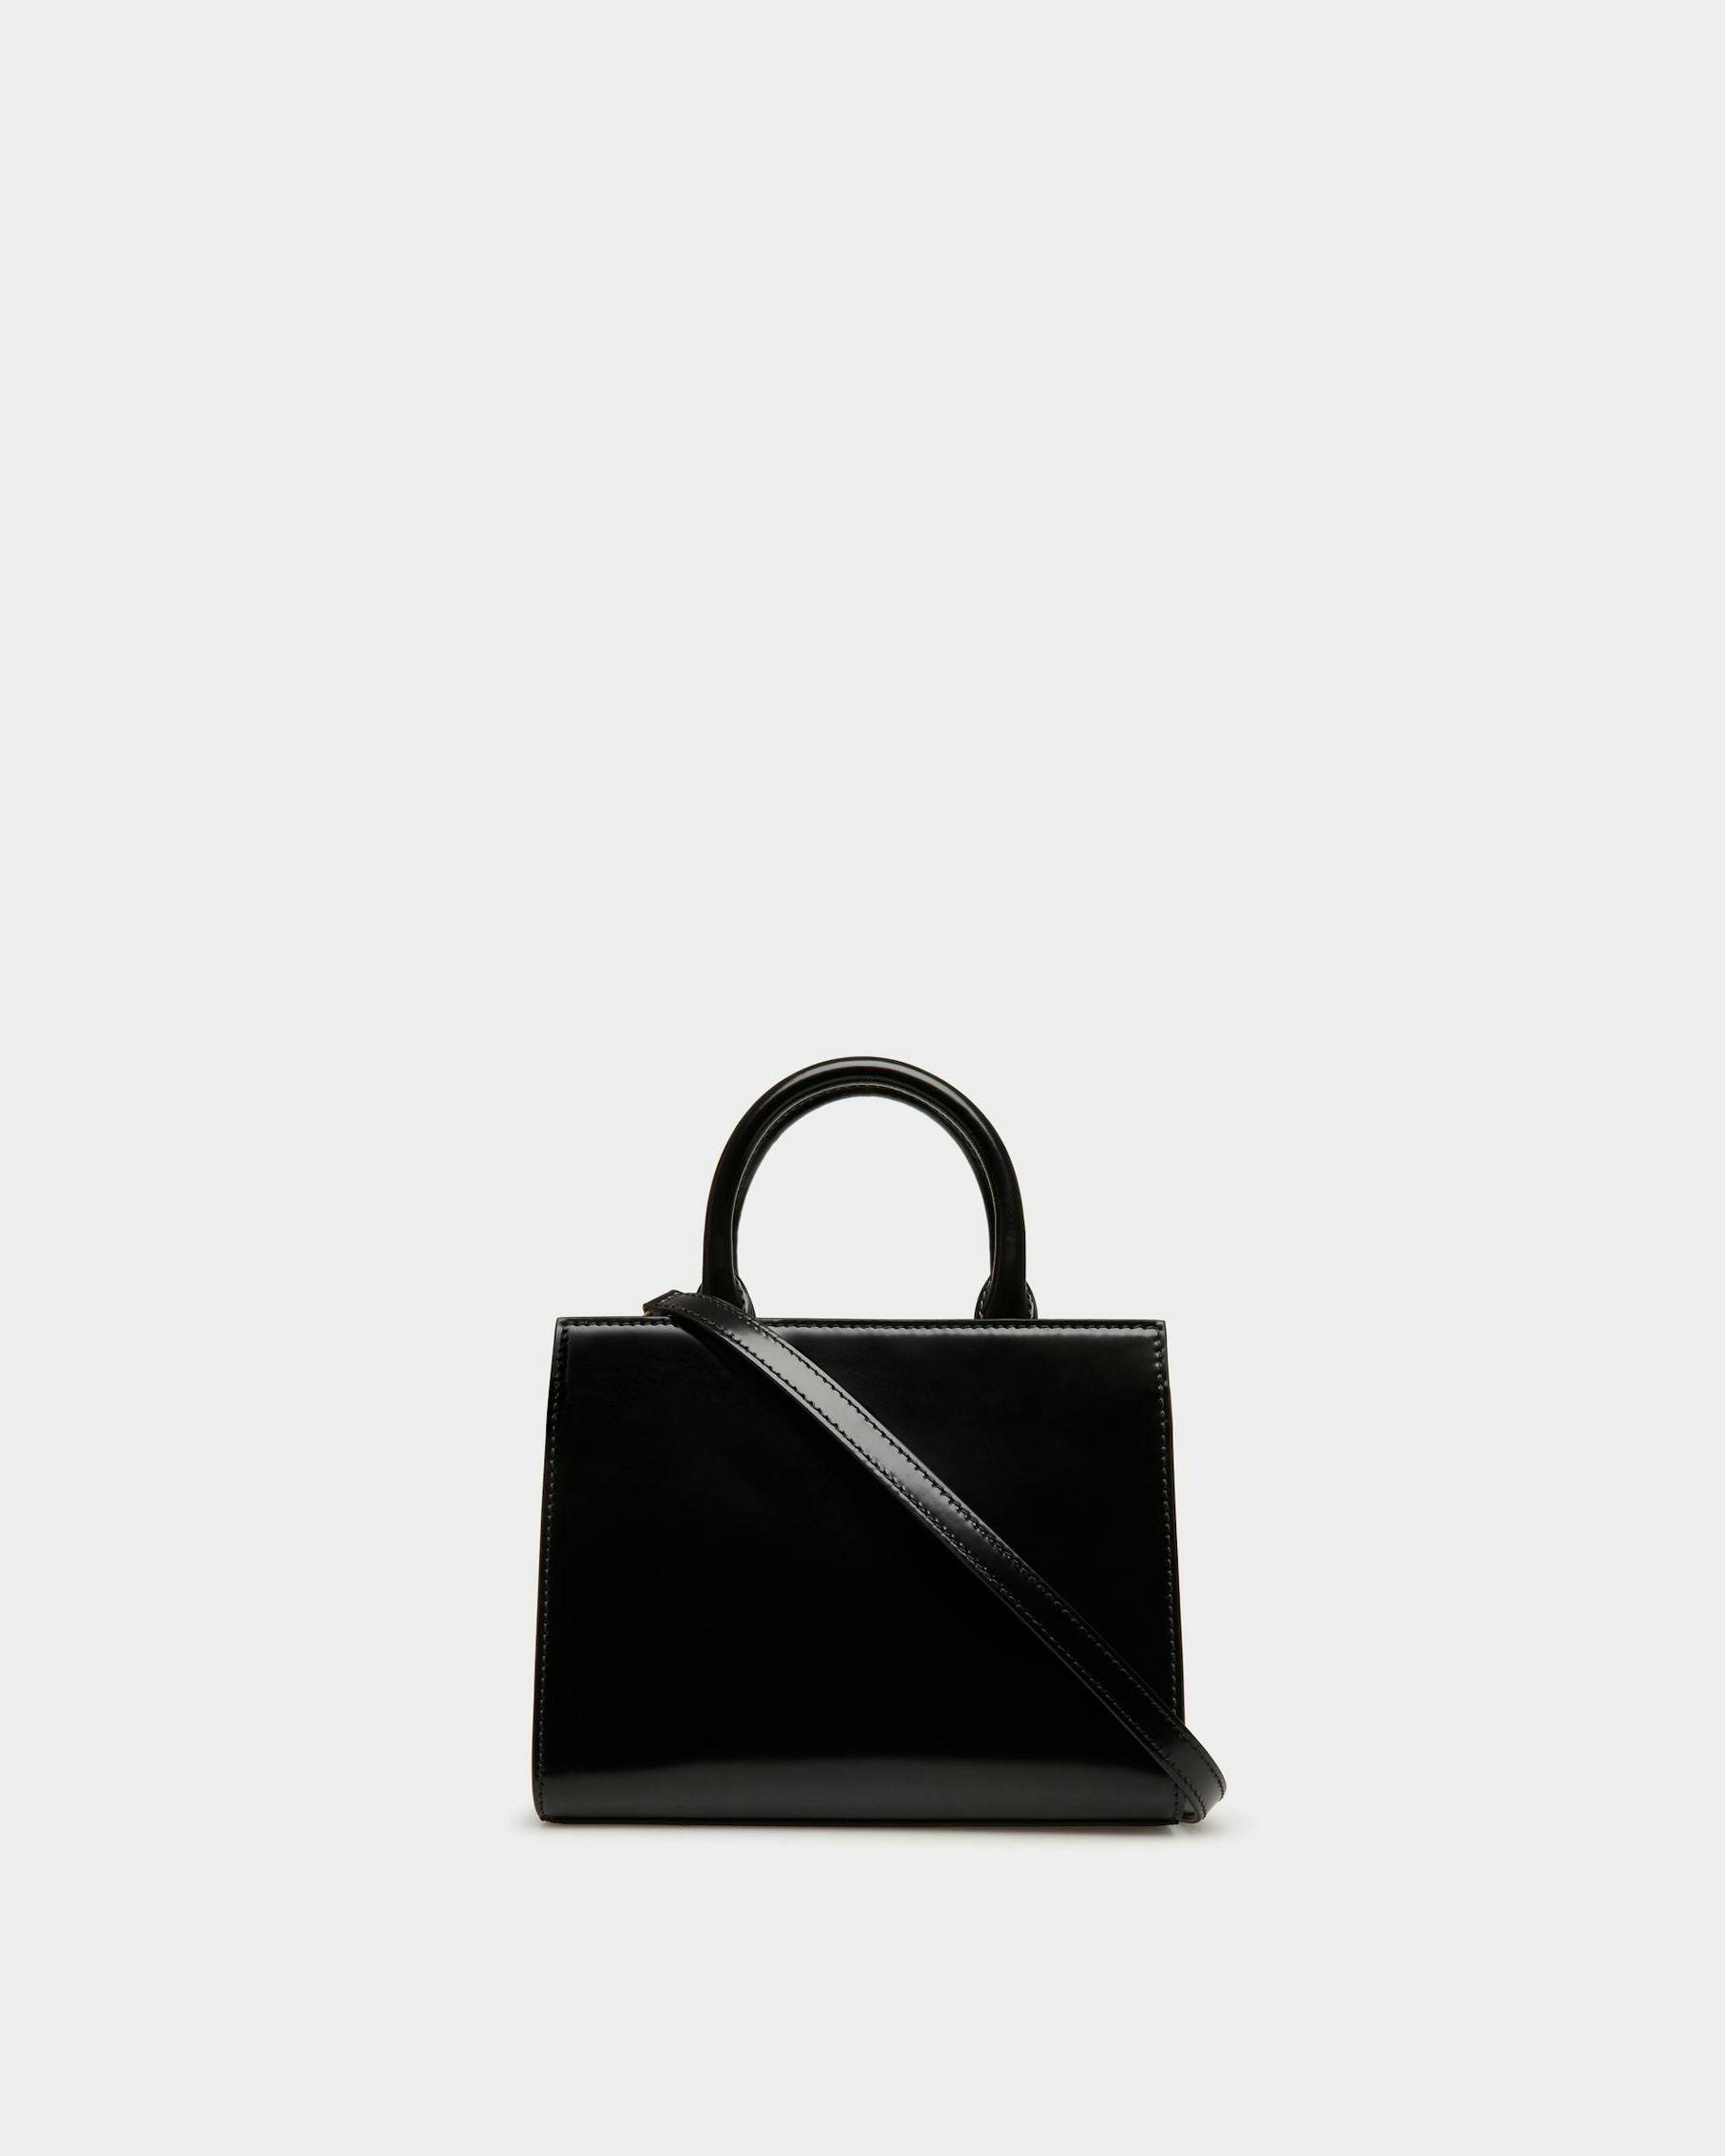 Women's Emblem Small Tote Bag In Black Patent Leather | Bally | Still Life Back